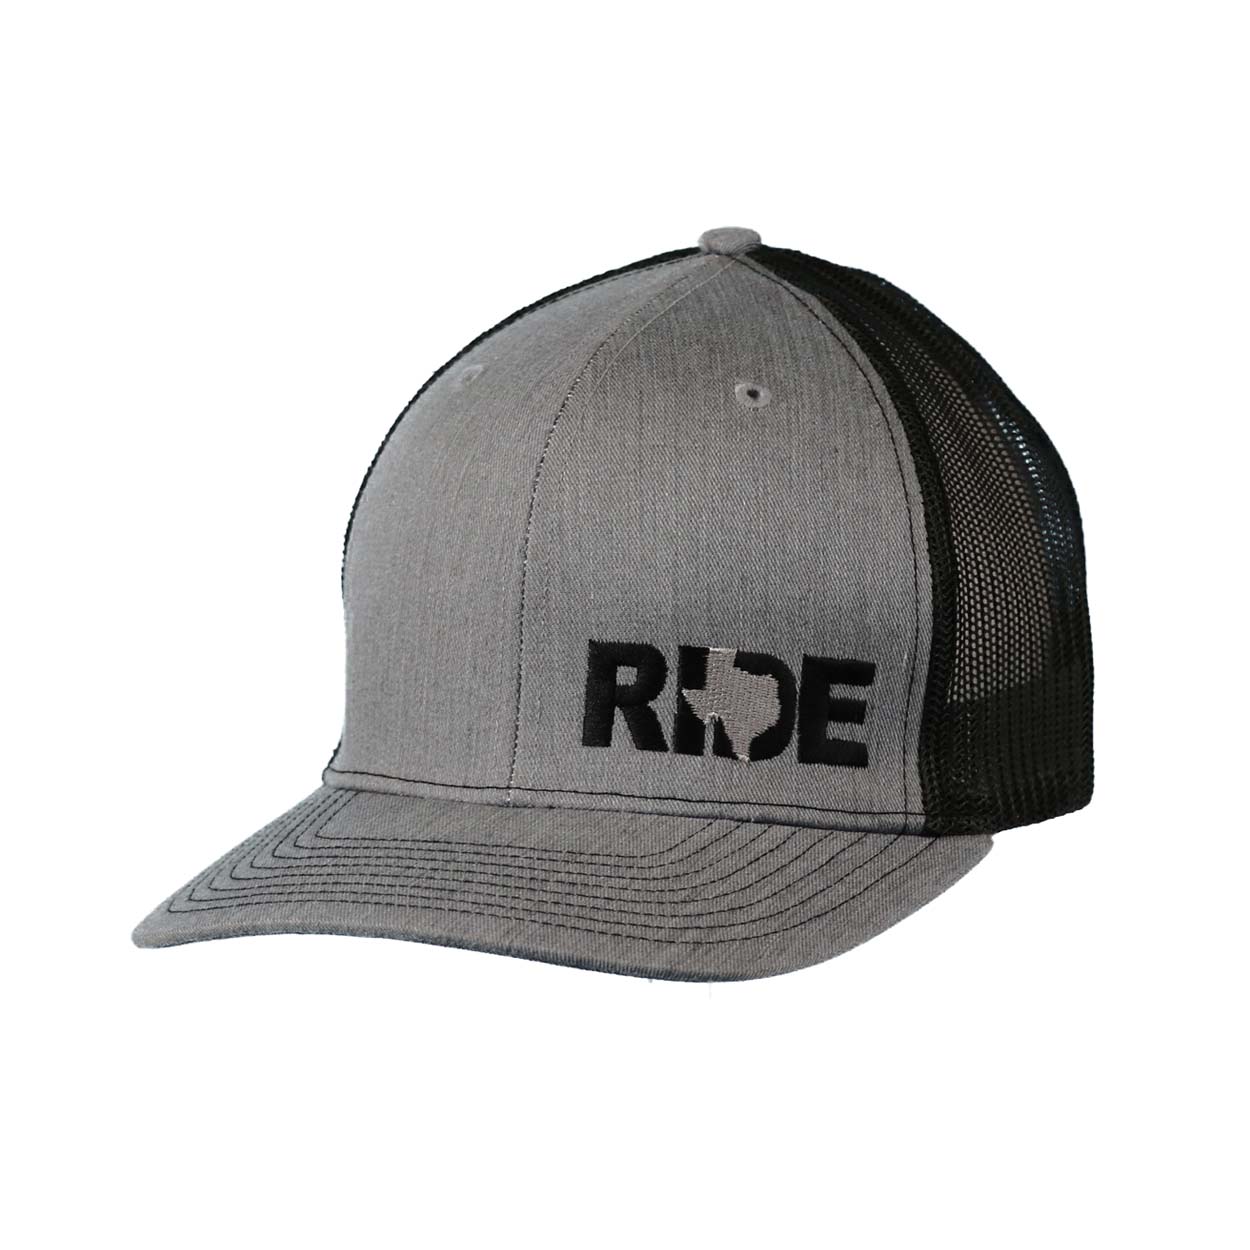 Ride Texas Night Out Embroidered Snapback Trucker Hat Heather Gray/Black